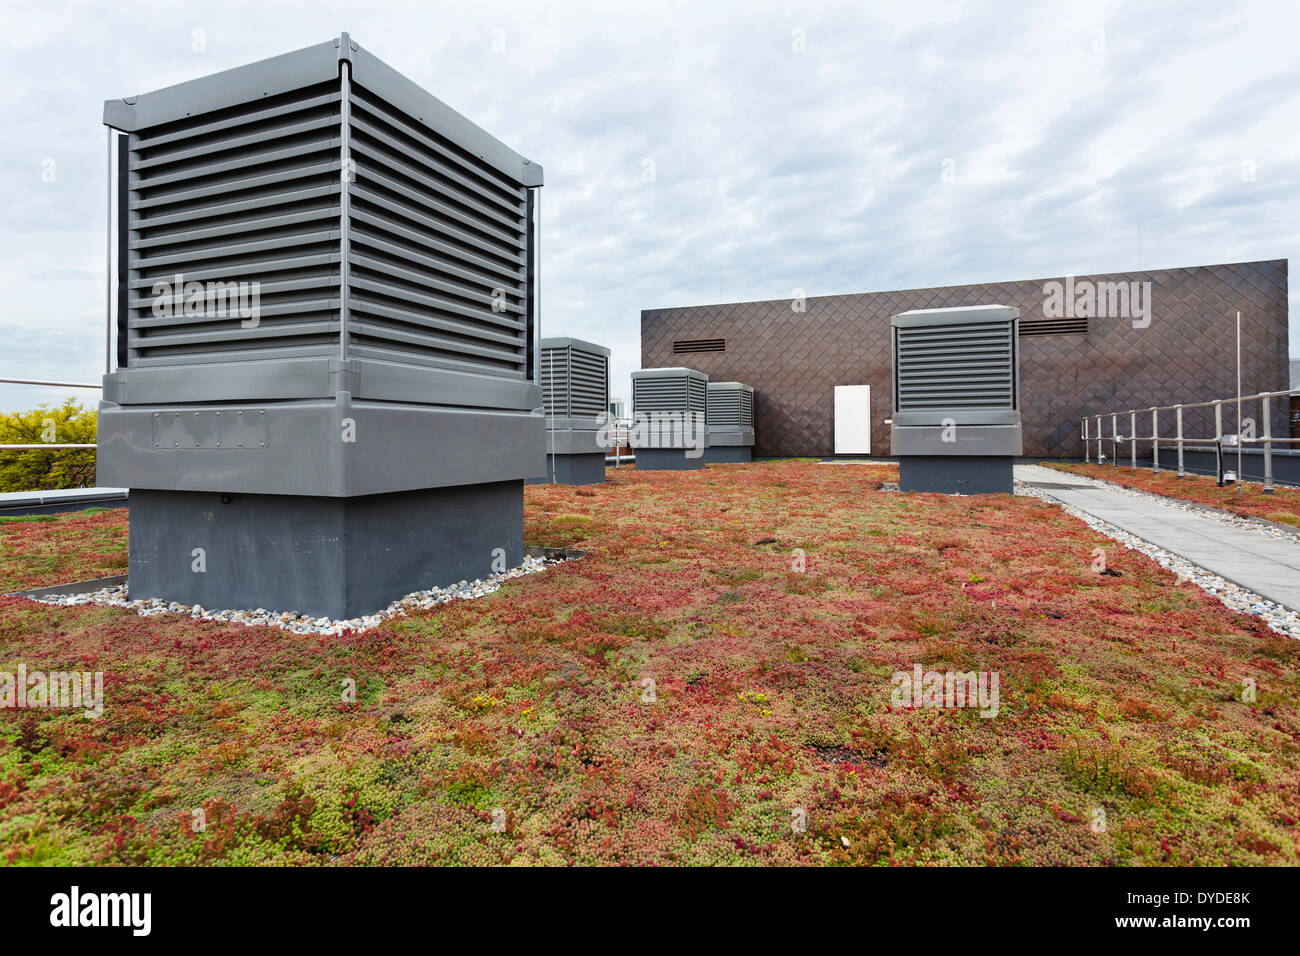 Monodraft louvre ventilation and Sedum green roof on Notting Hill and Ealing High School. Stock Photo